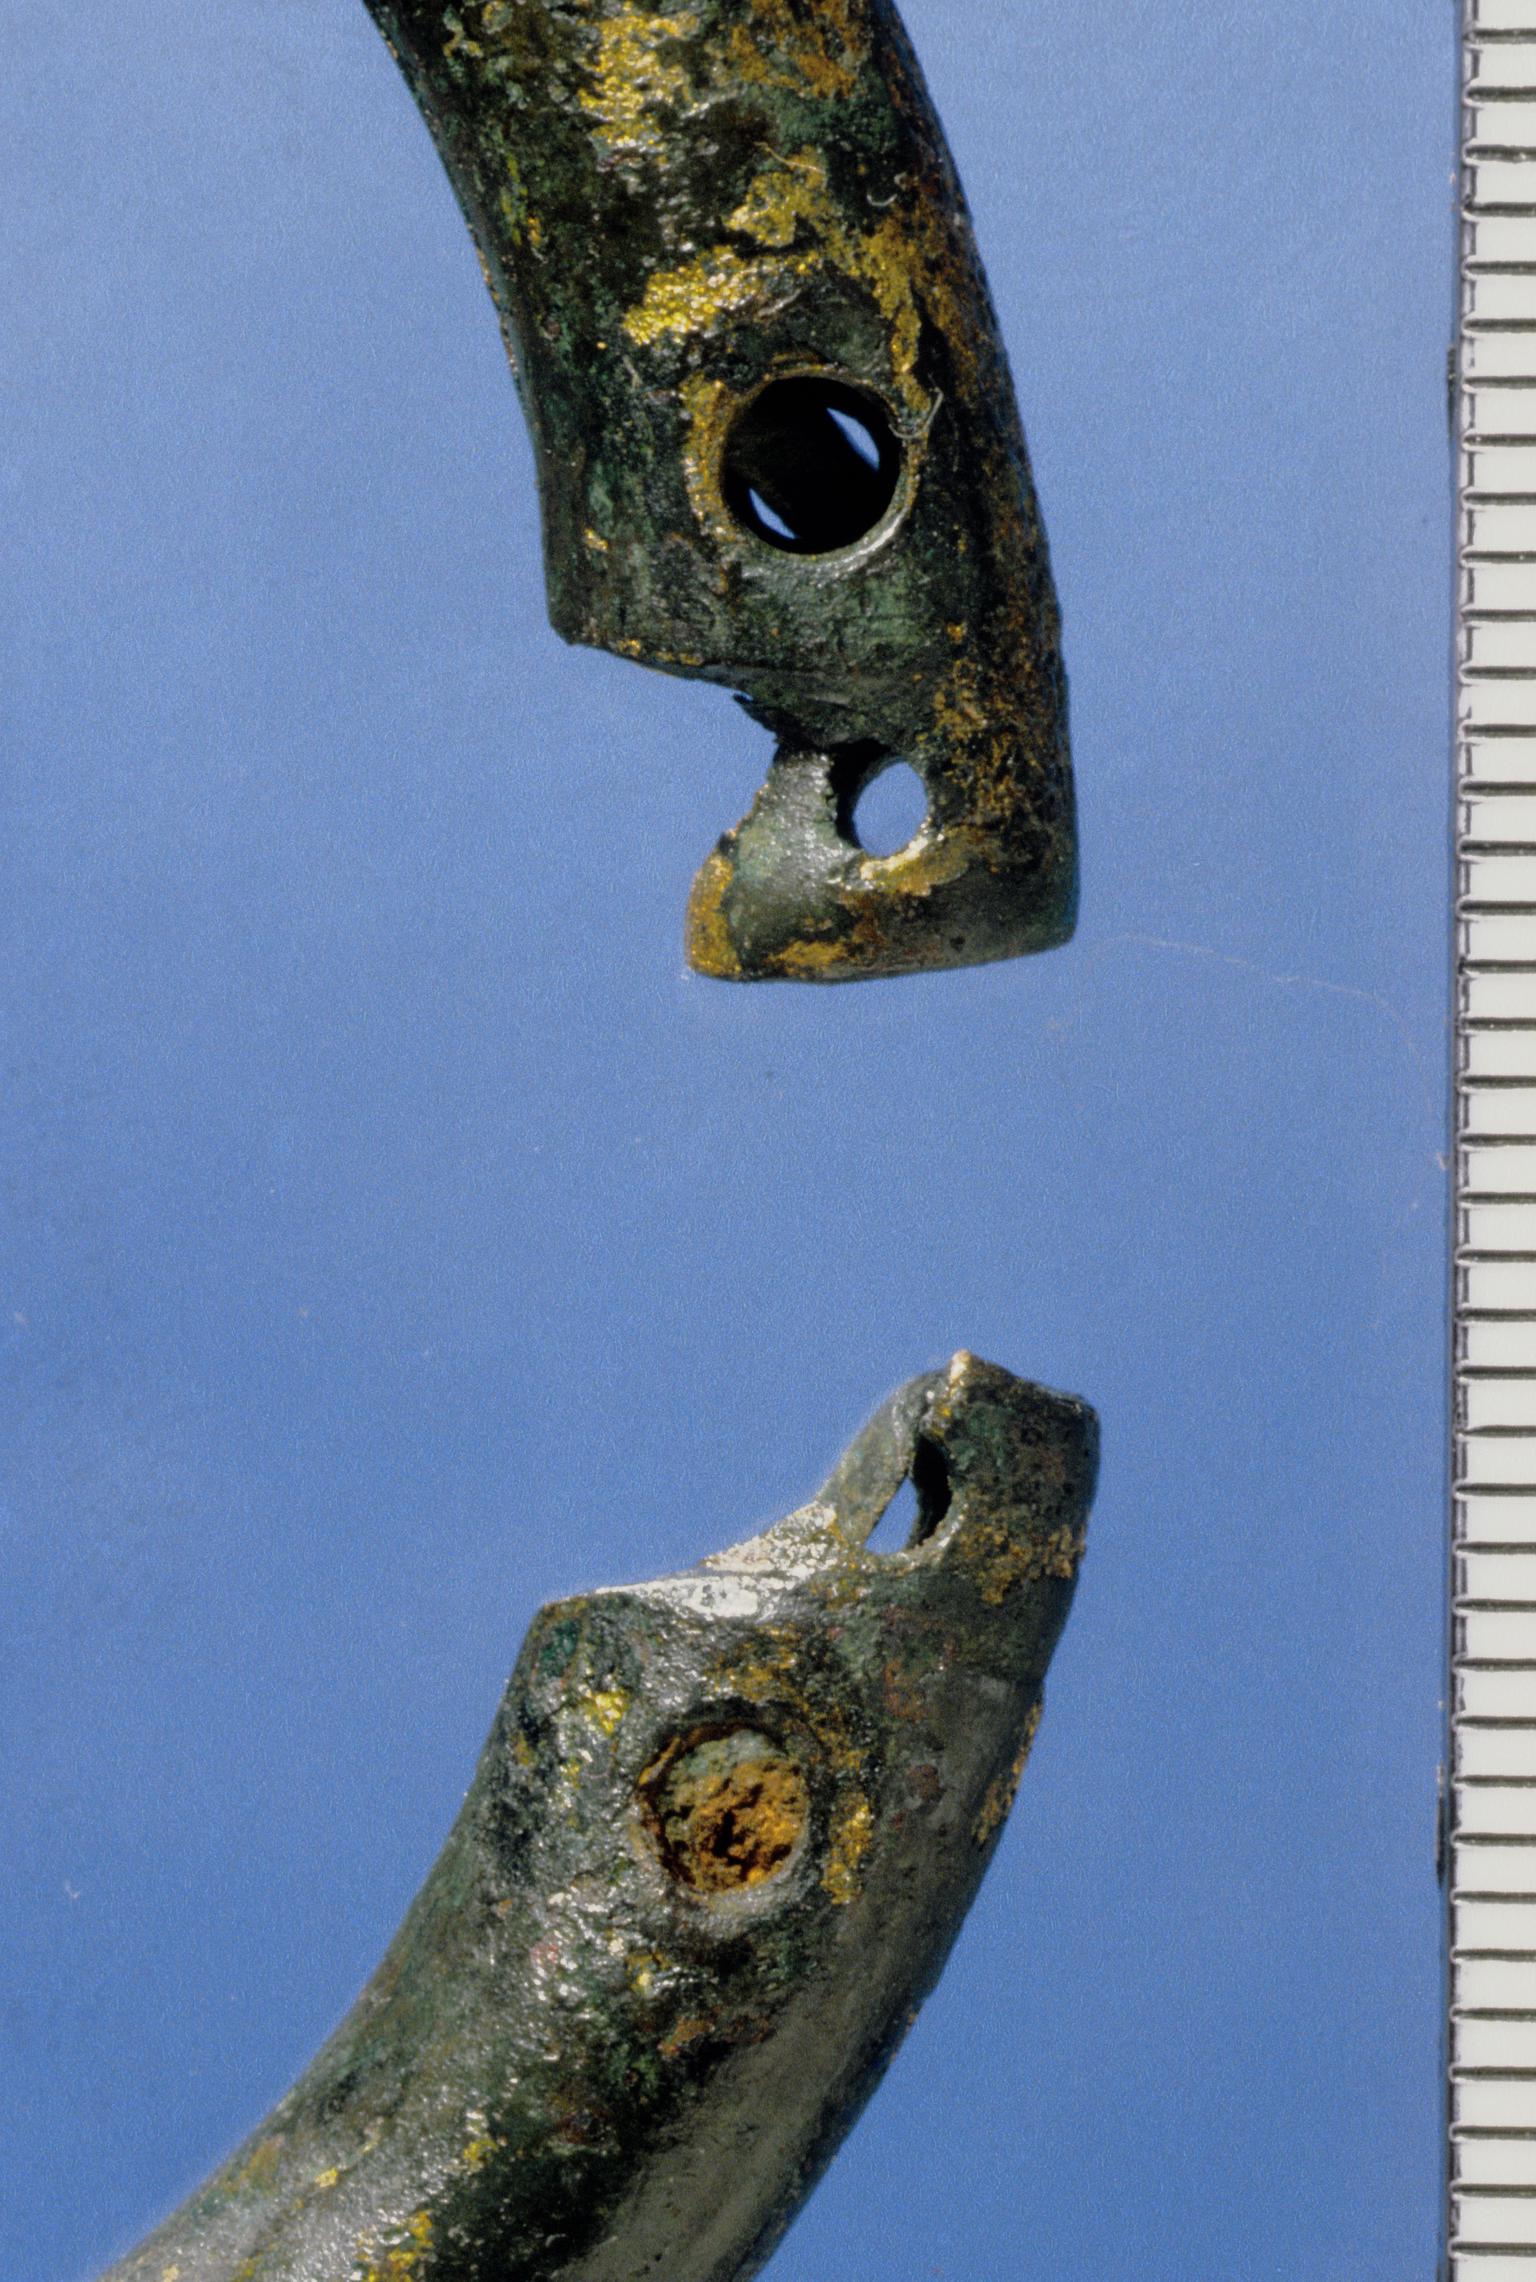 Late Iron Age copper alloy rein ring